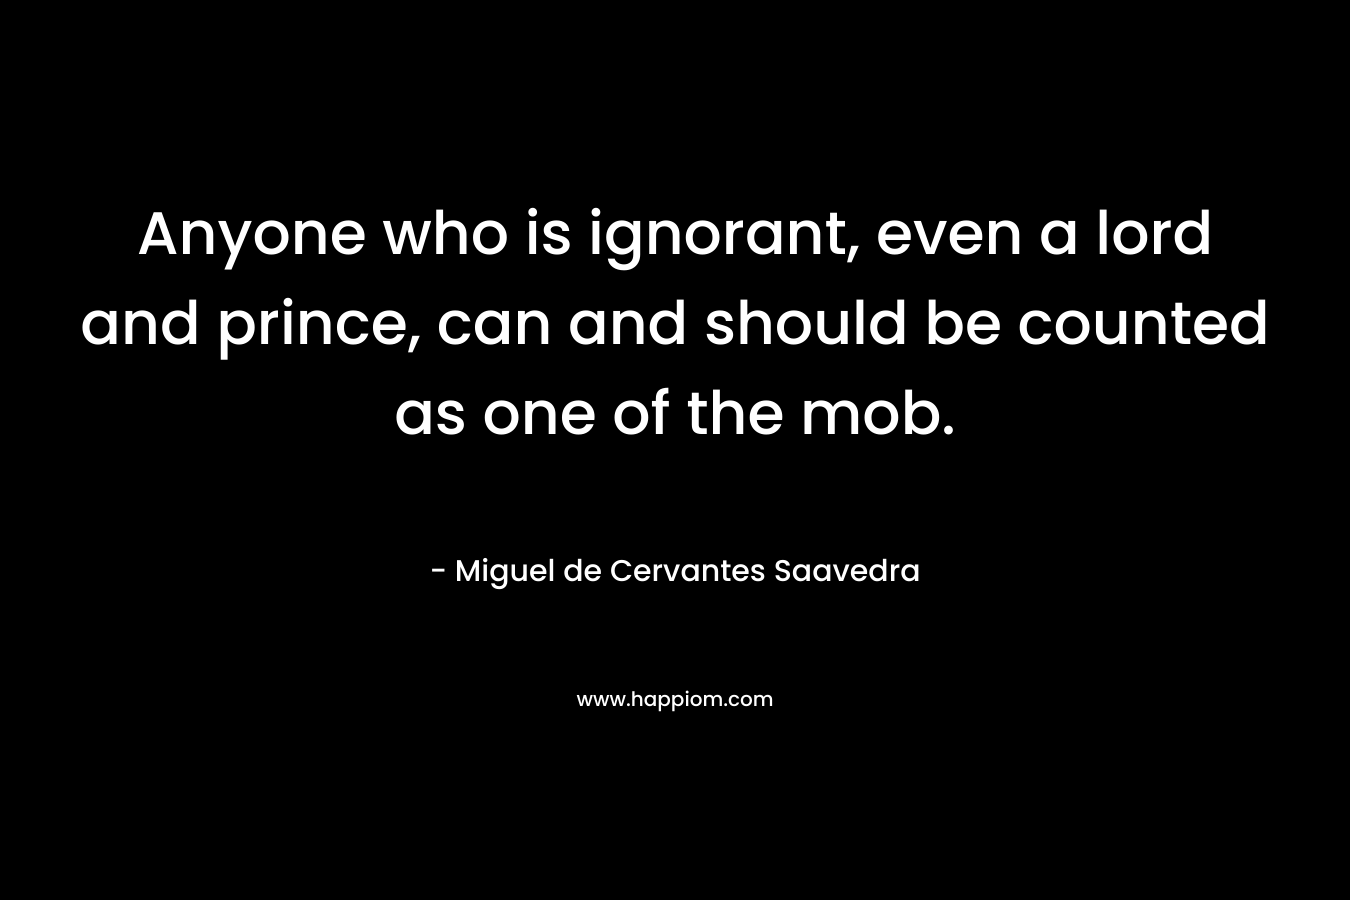 Anyone who is ignorant, even a lord and prince, can and should be counted as one of the mob. – Miguel de Cervantes Saavedra